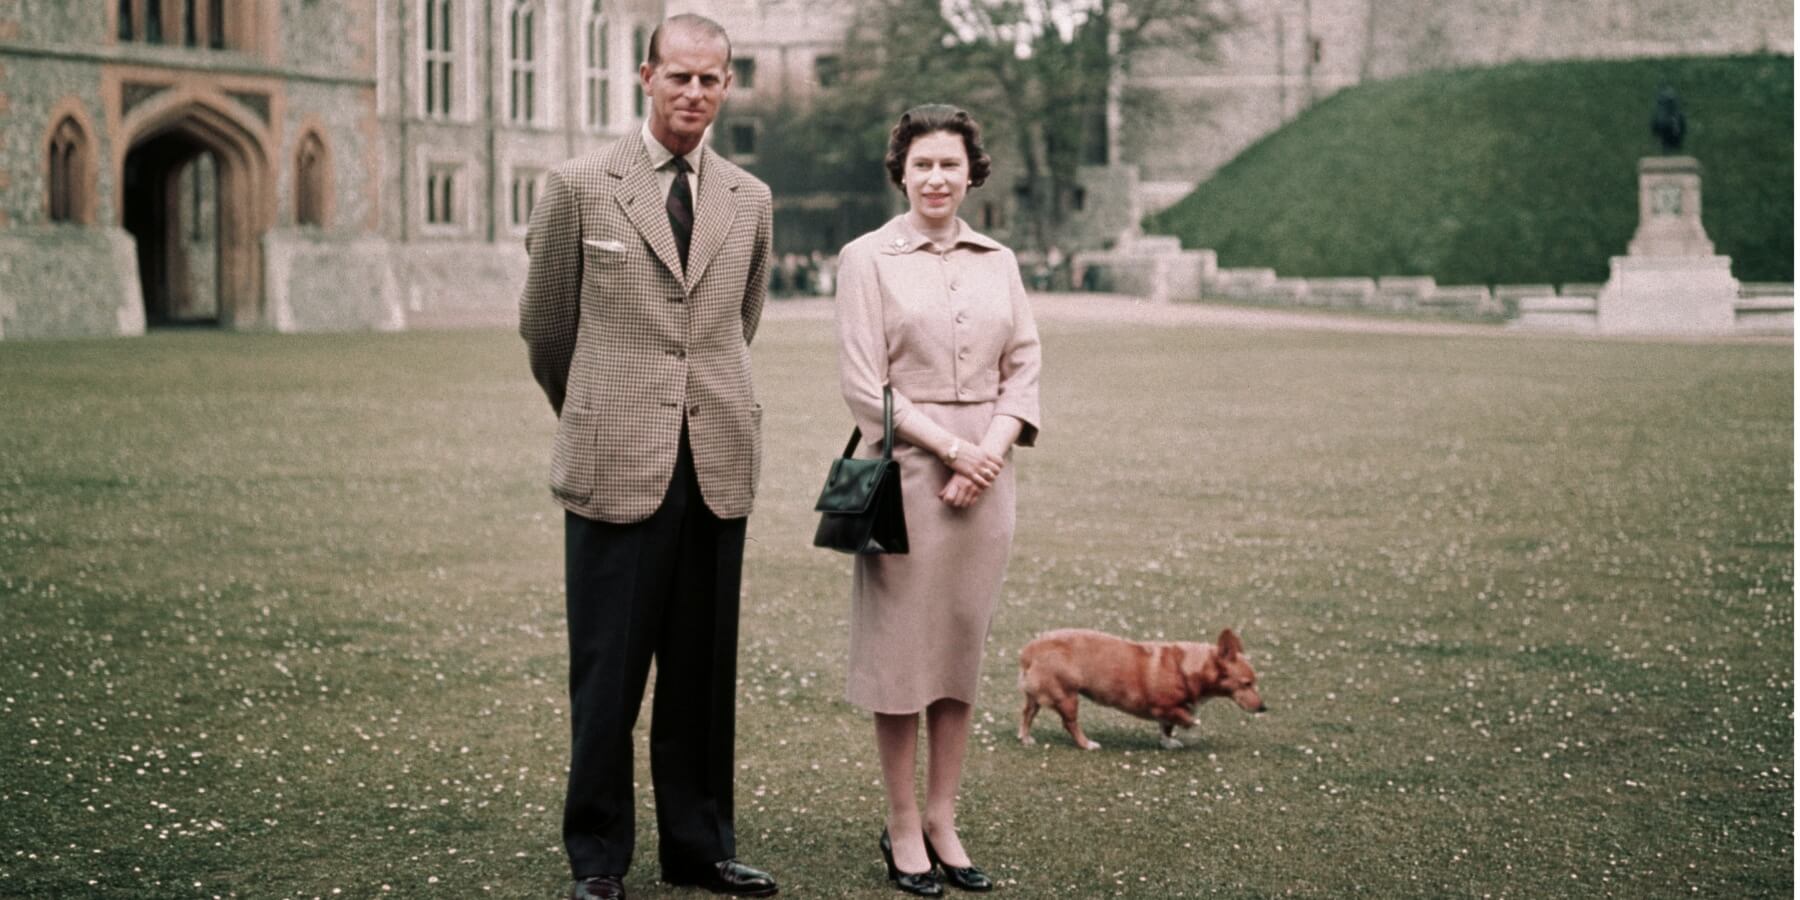 Prince Philip affectionately used the nickname Lilibet for his wife, Queen Elizabeth throughout their marriage.